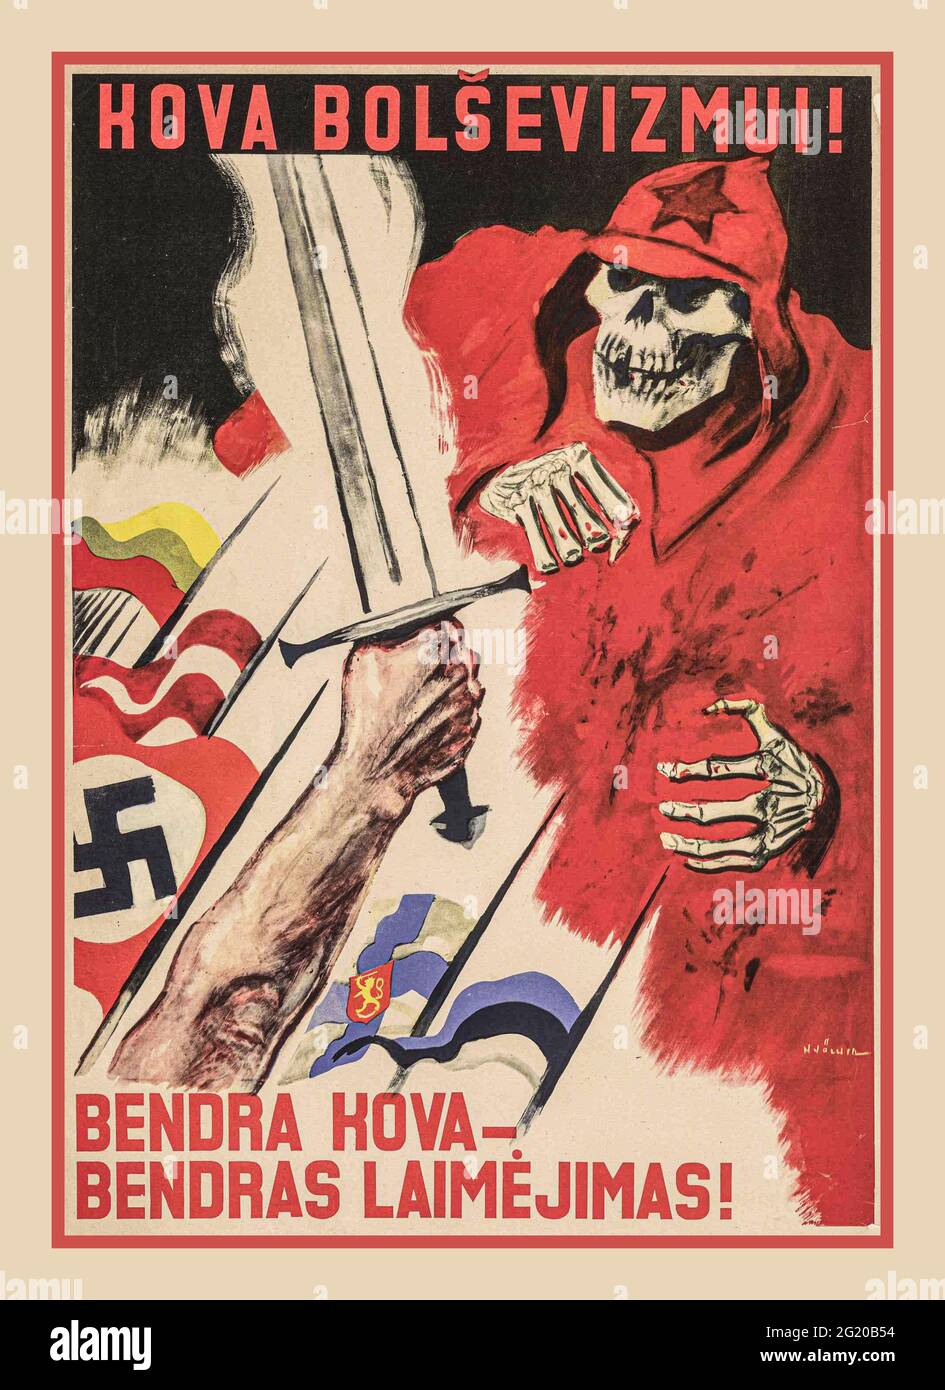 Vintage Lithuania WW2 Propaganda Poster “WE FIGHT AGAINST BOLSHEVISM ! “ Anti communist Bolshevism poster with sword held aloft alongside the Swastika flag with a Soviet Red Army deaths head skeleton advancing. Struggle against Bolshevism! Lithuanian Nazi Collaboration poster, c. 1941-1944 Stock Photo